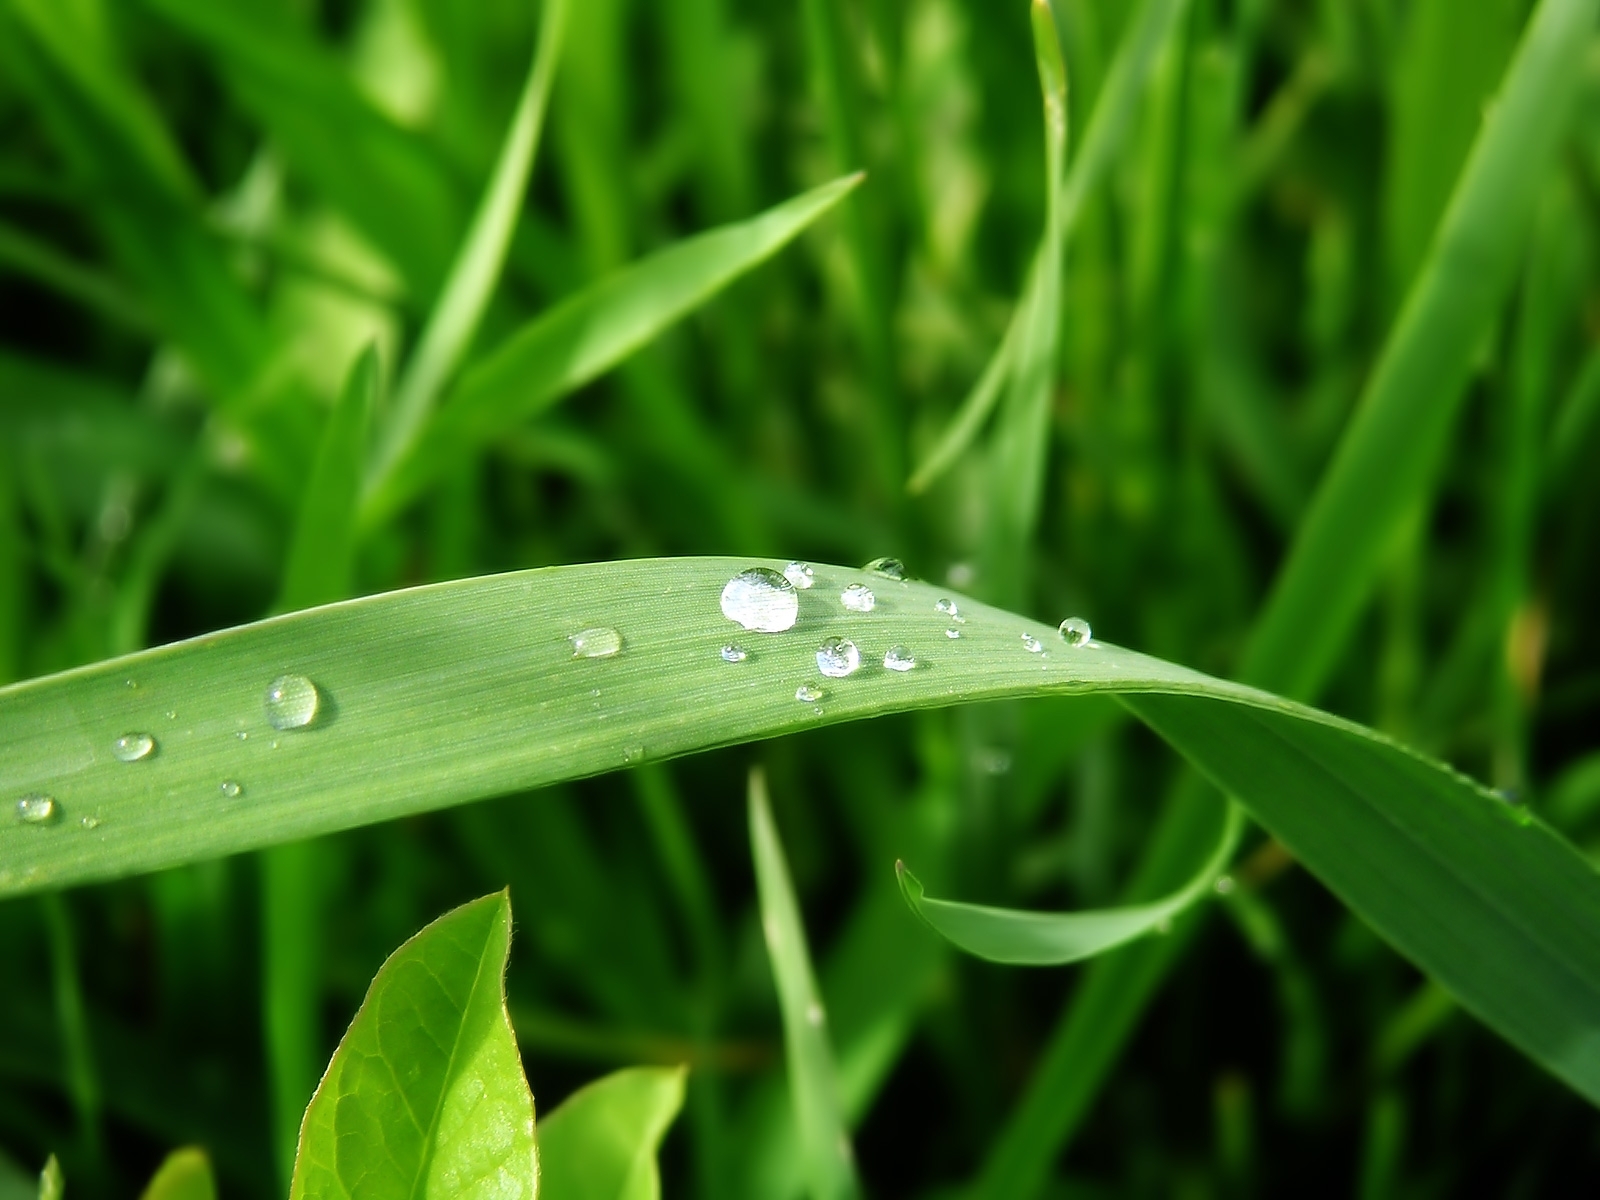 drops, plants, grass, green High Definition image